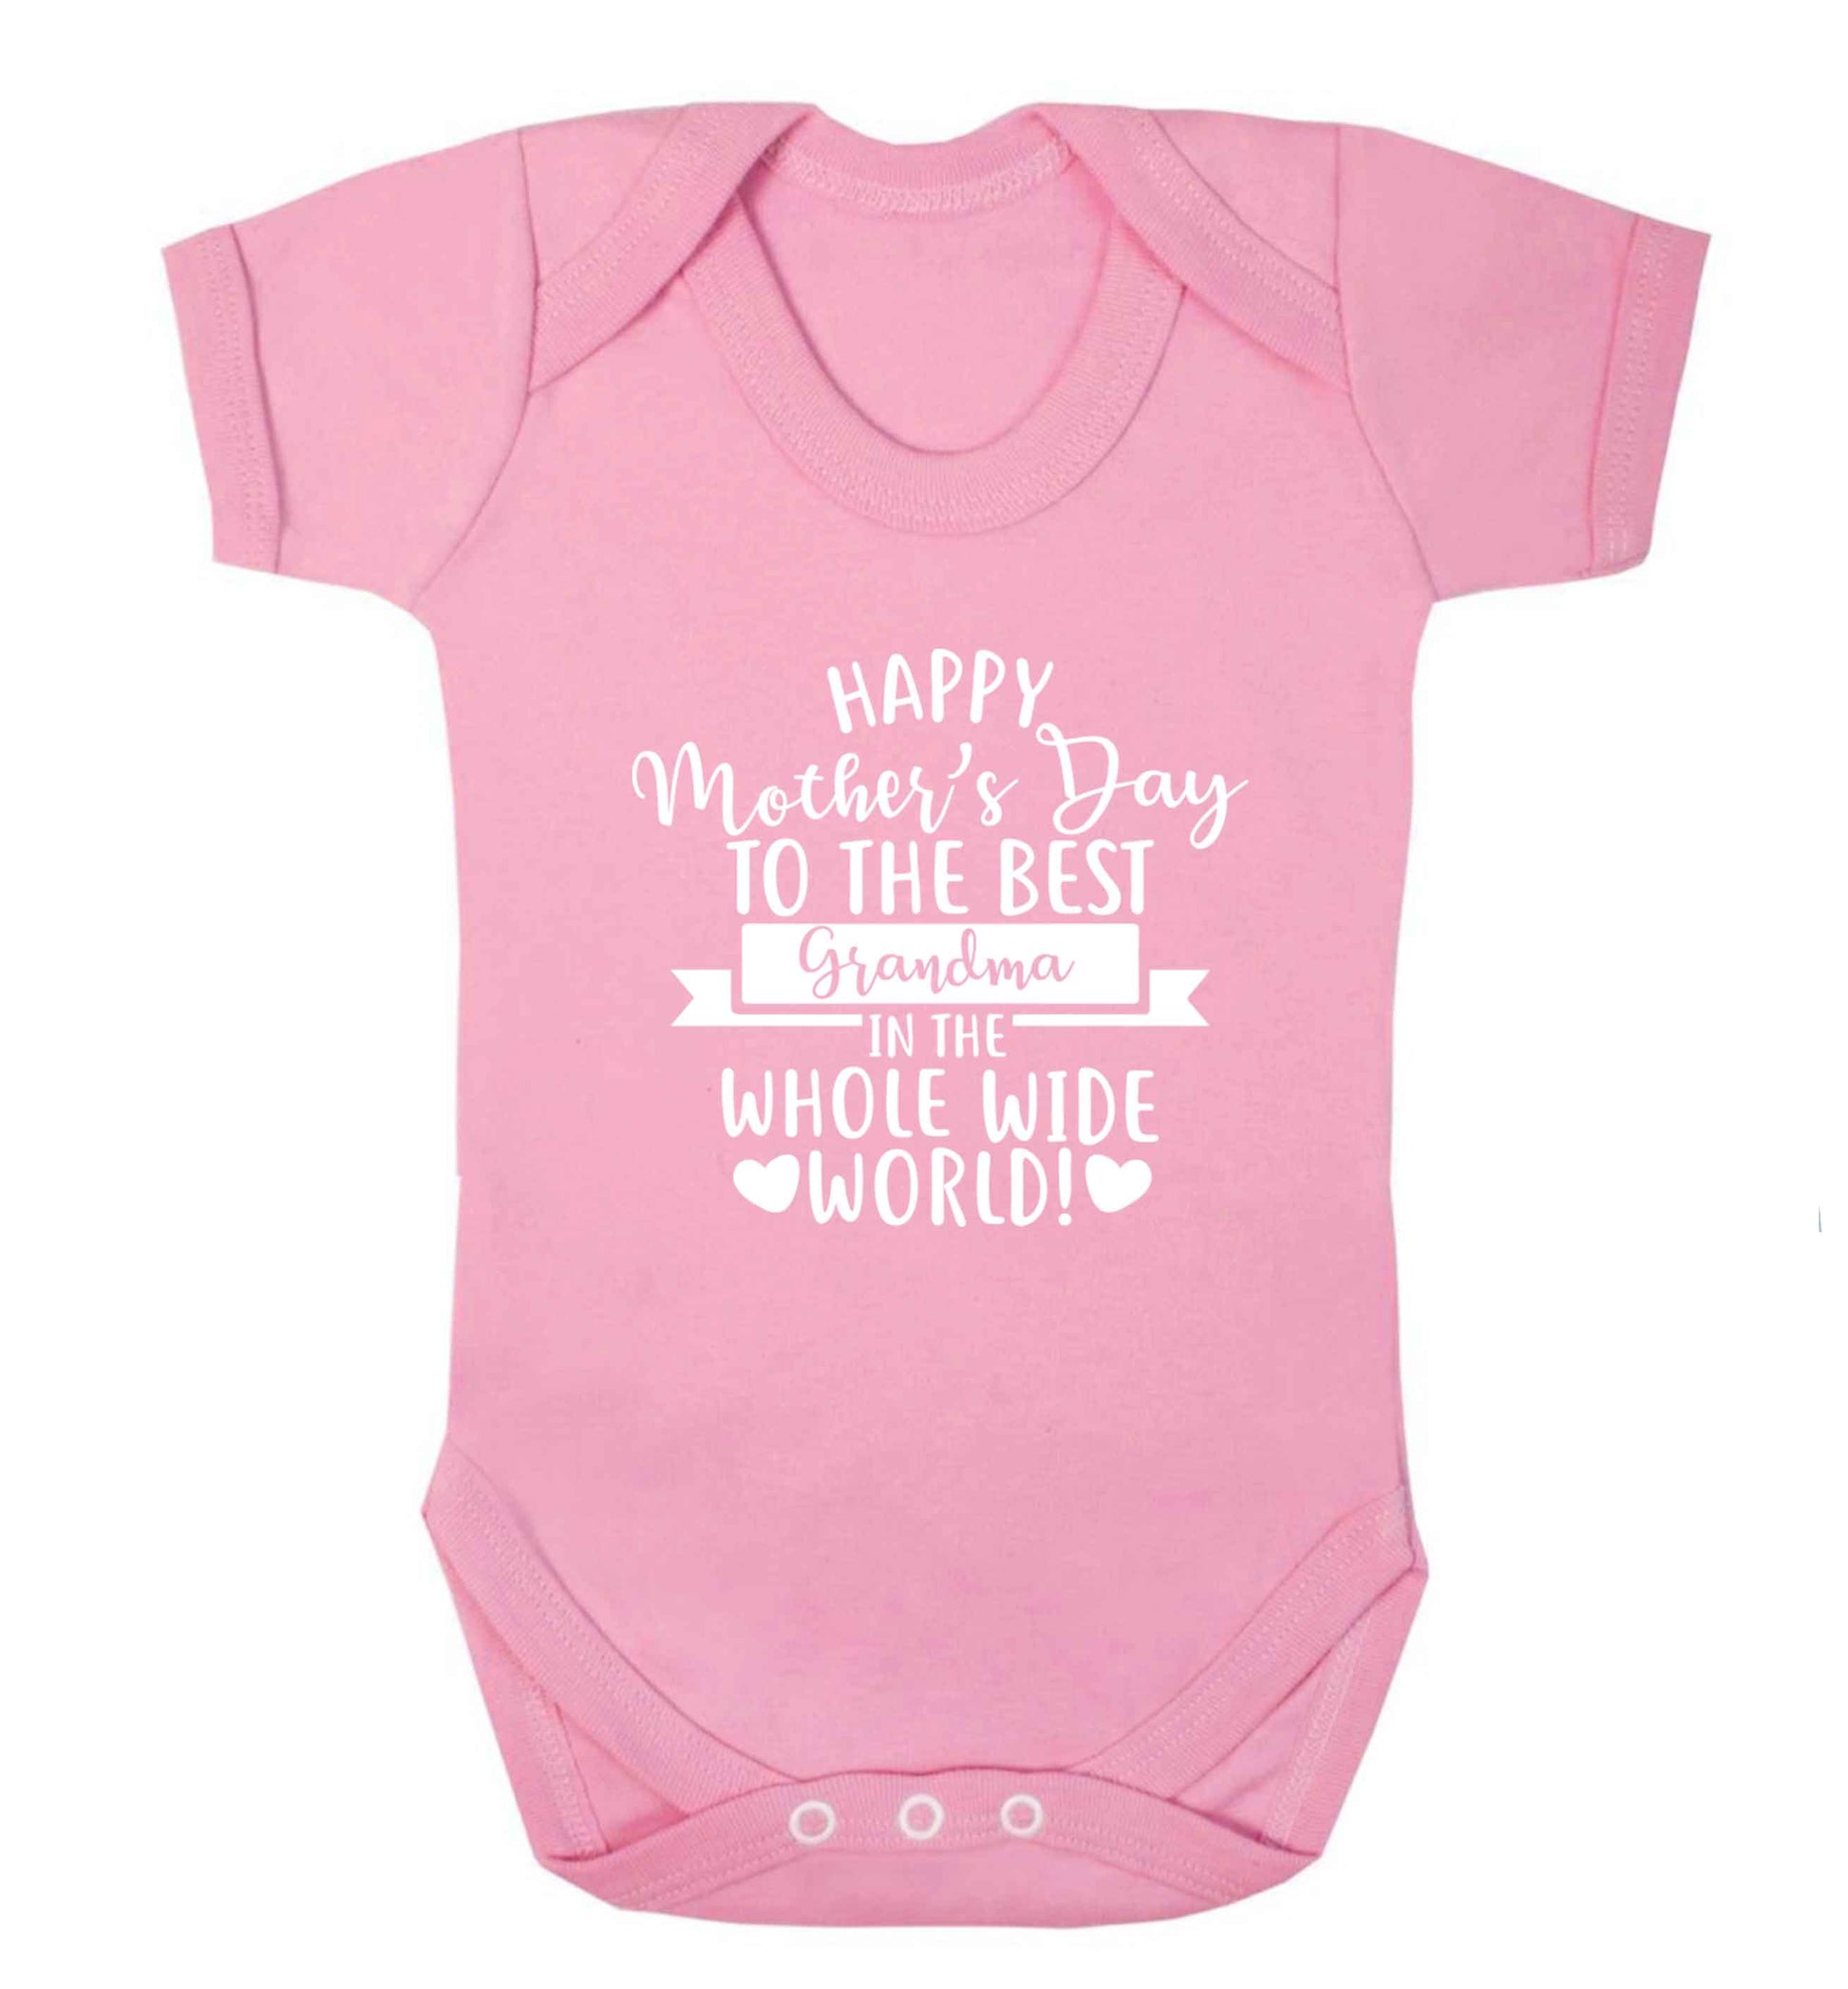 Happy mother's day to the best grandma in the world baby vest pale pink 18-24 months